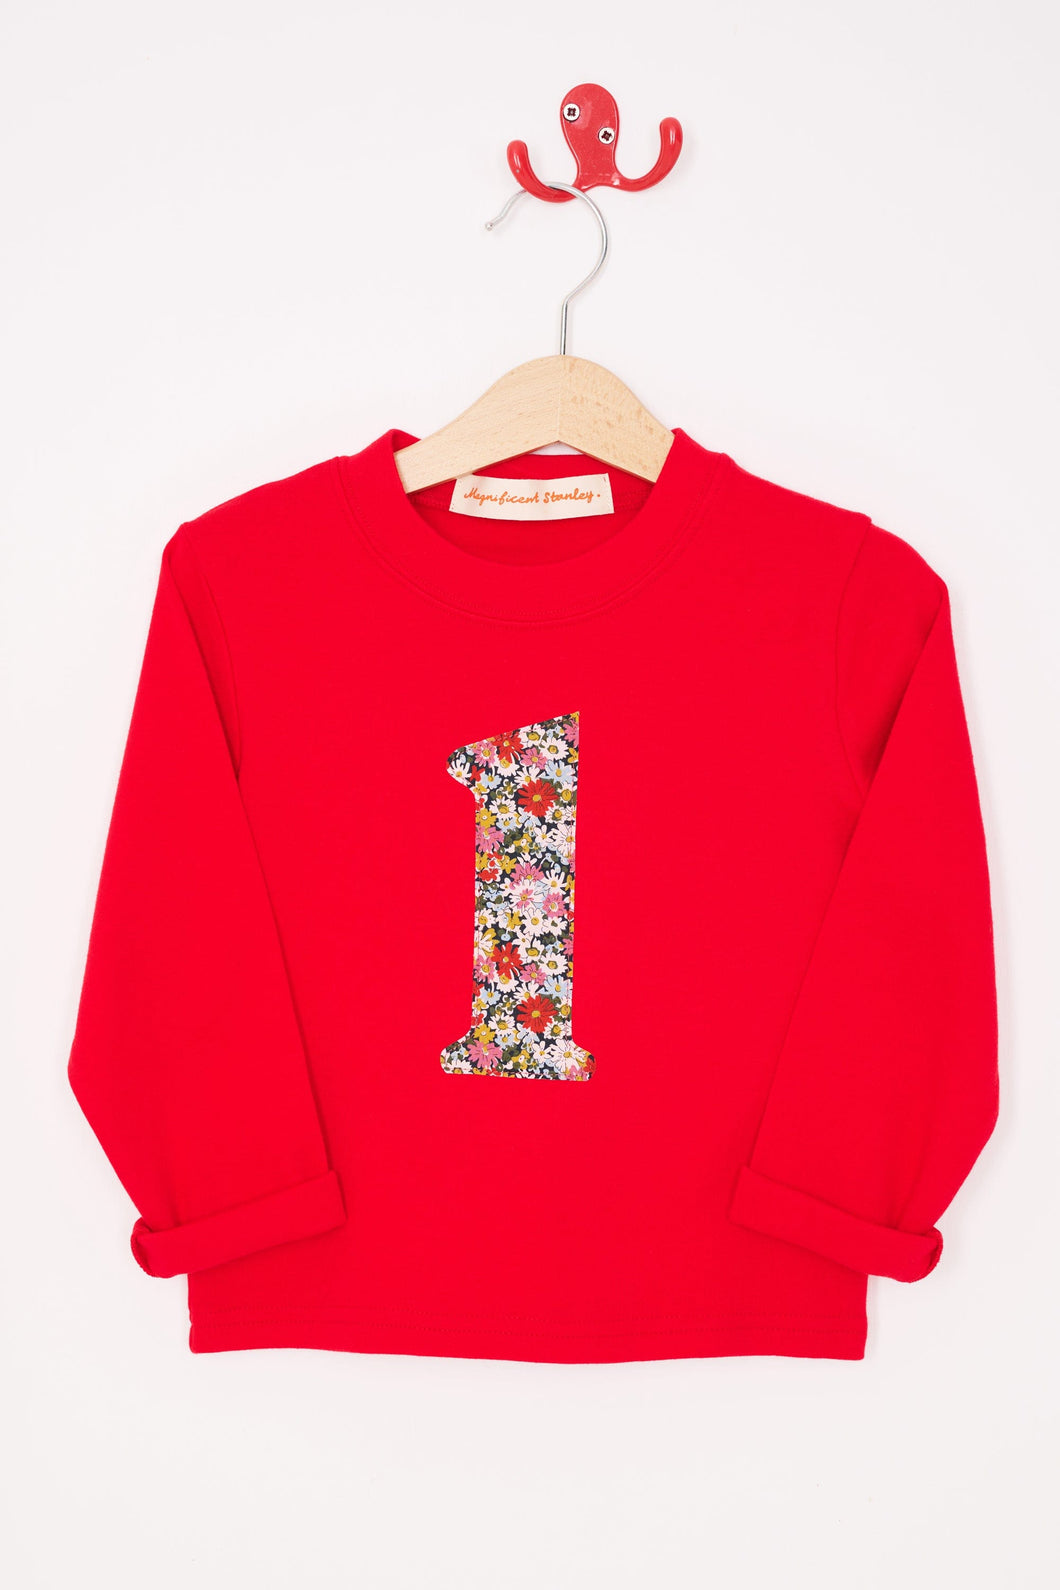 Magnificent Stanley Tee Number Red T-Shirt in Libby Liberty Print